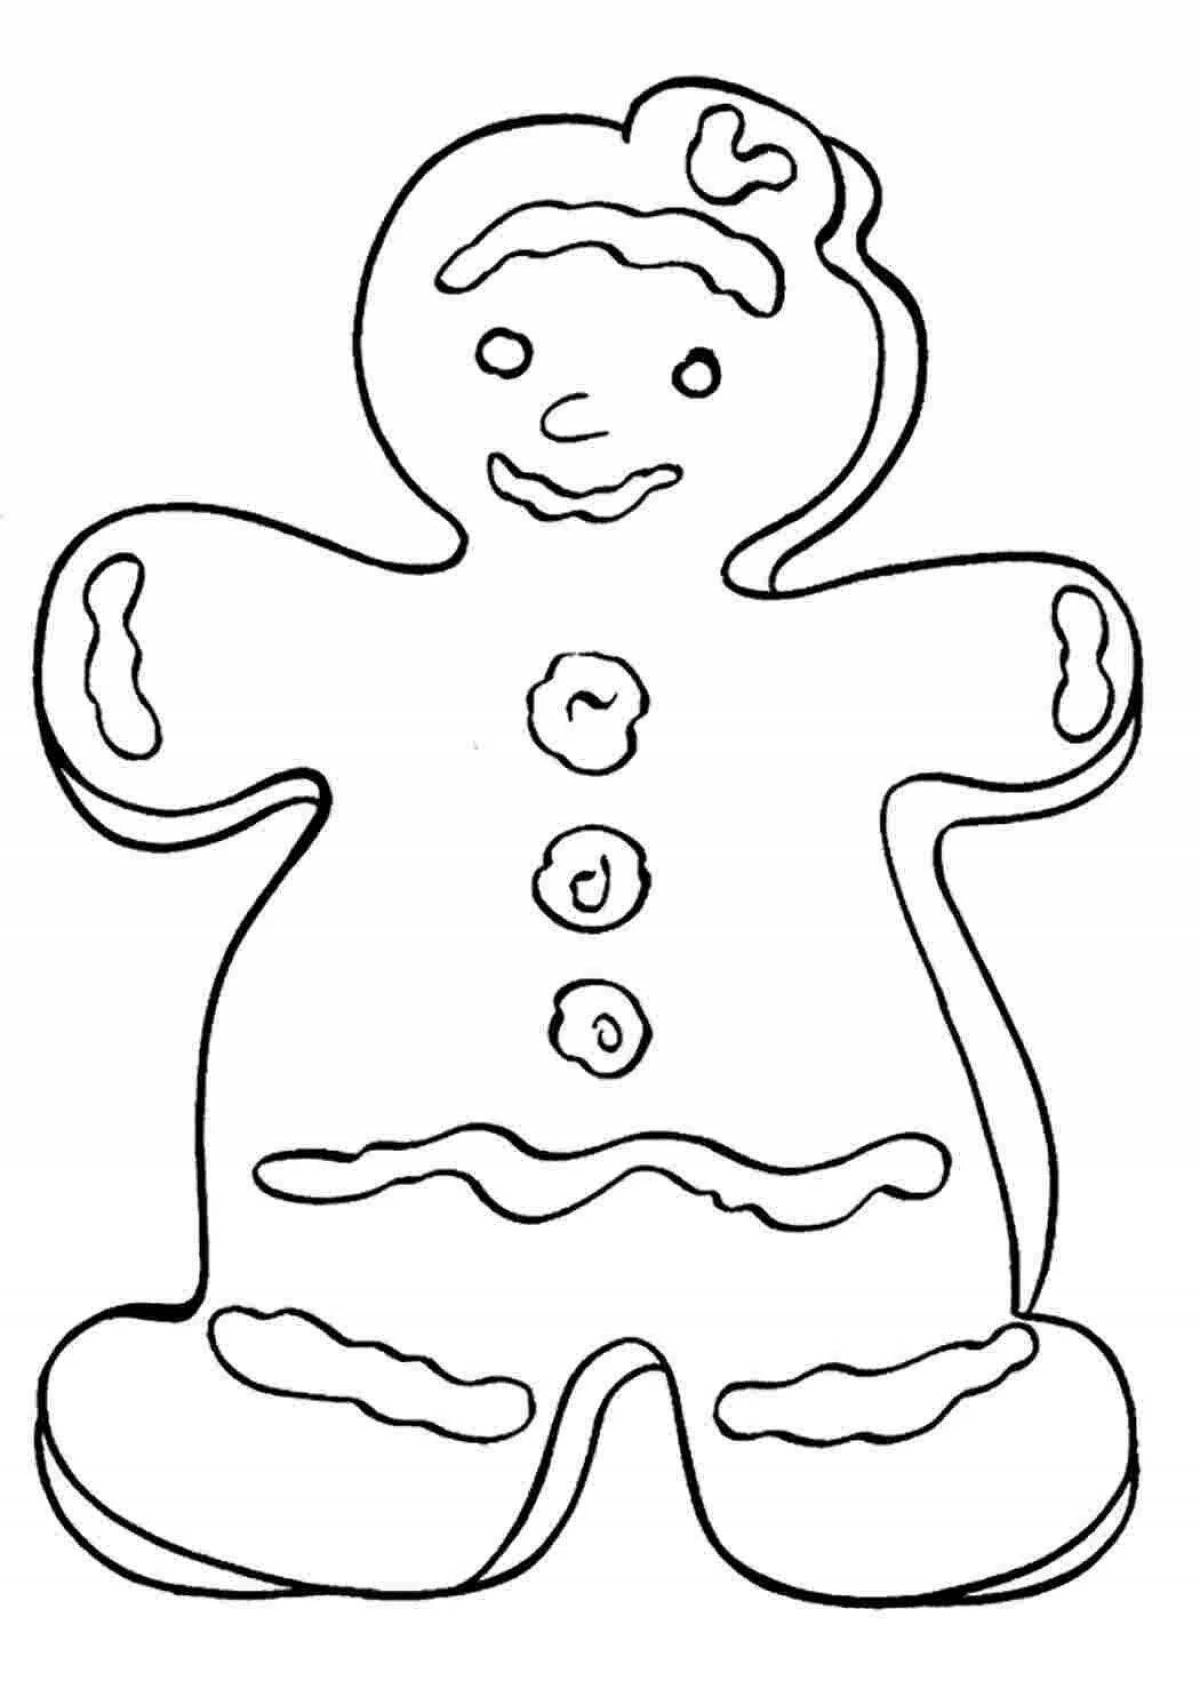 Christmas cookie coloring book